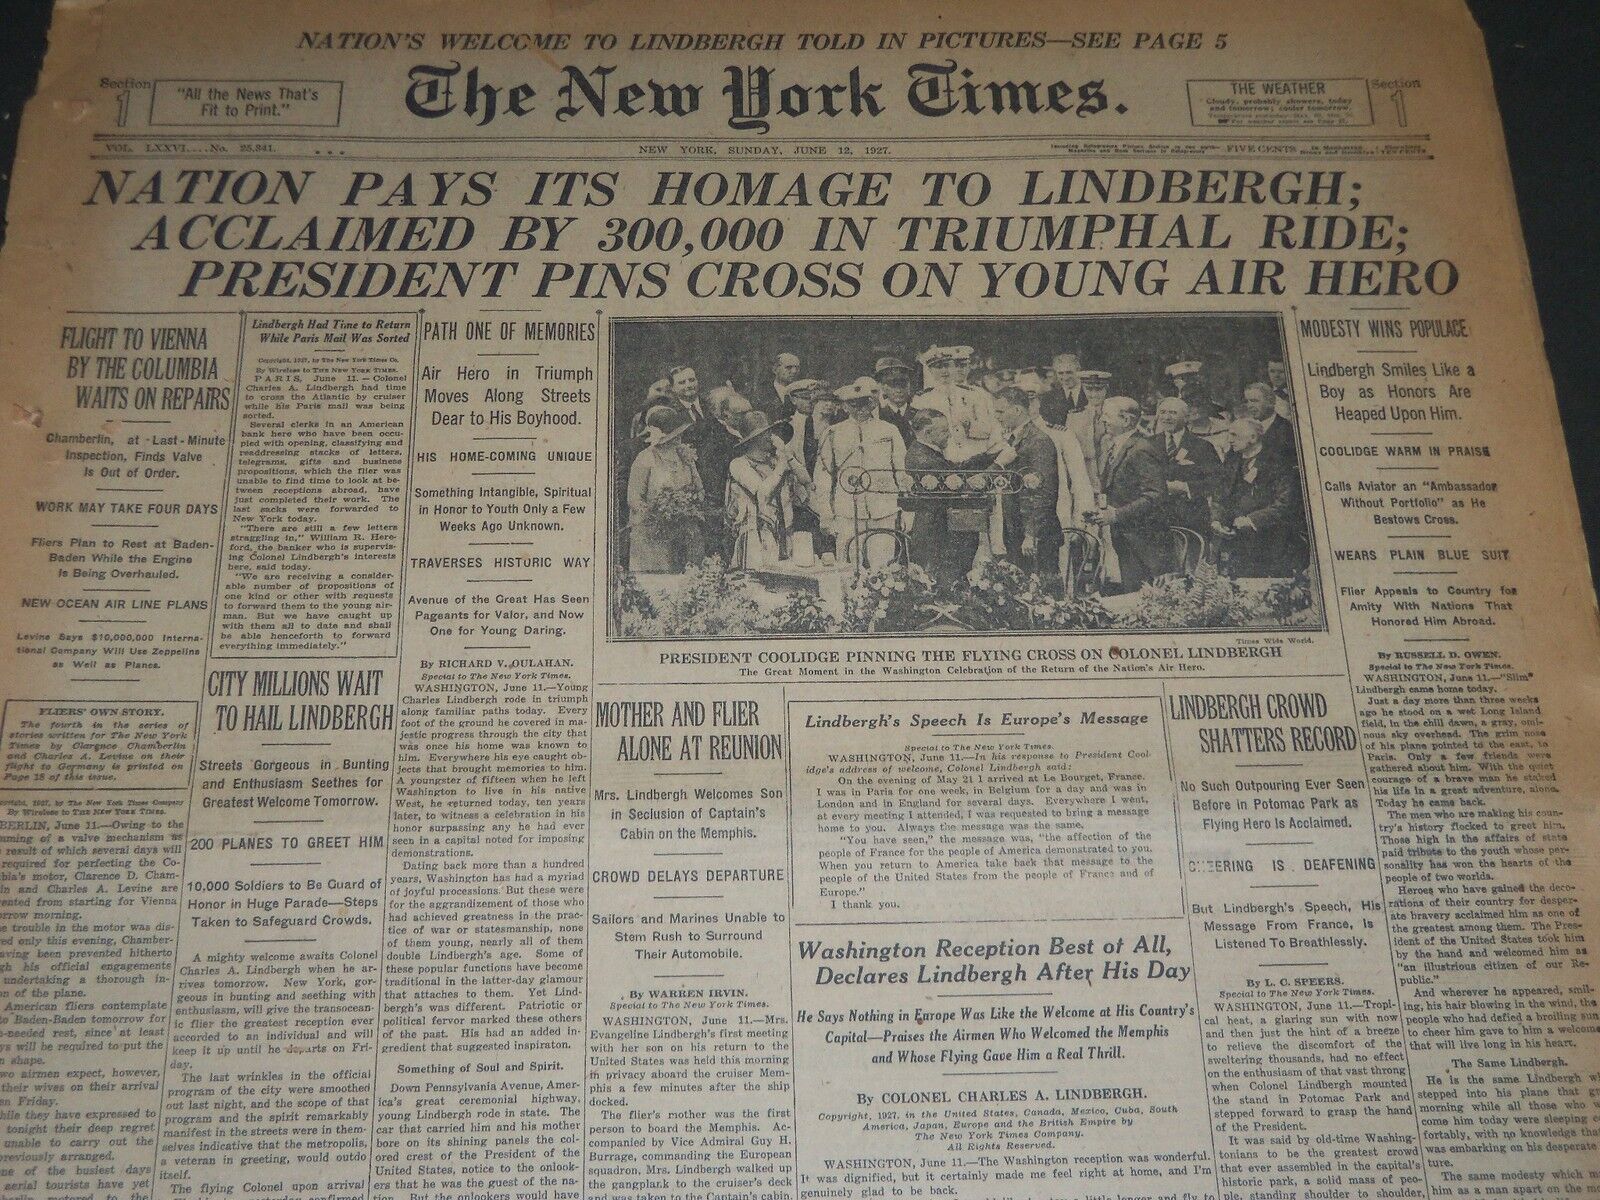 1927 JUNE 12 NEW YORK TIMES - NATION PAY ITS HOMAGE TO LINDBERGH - NT 5067